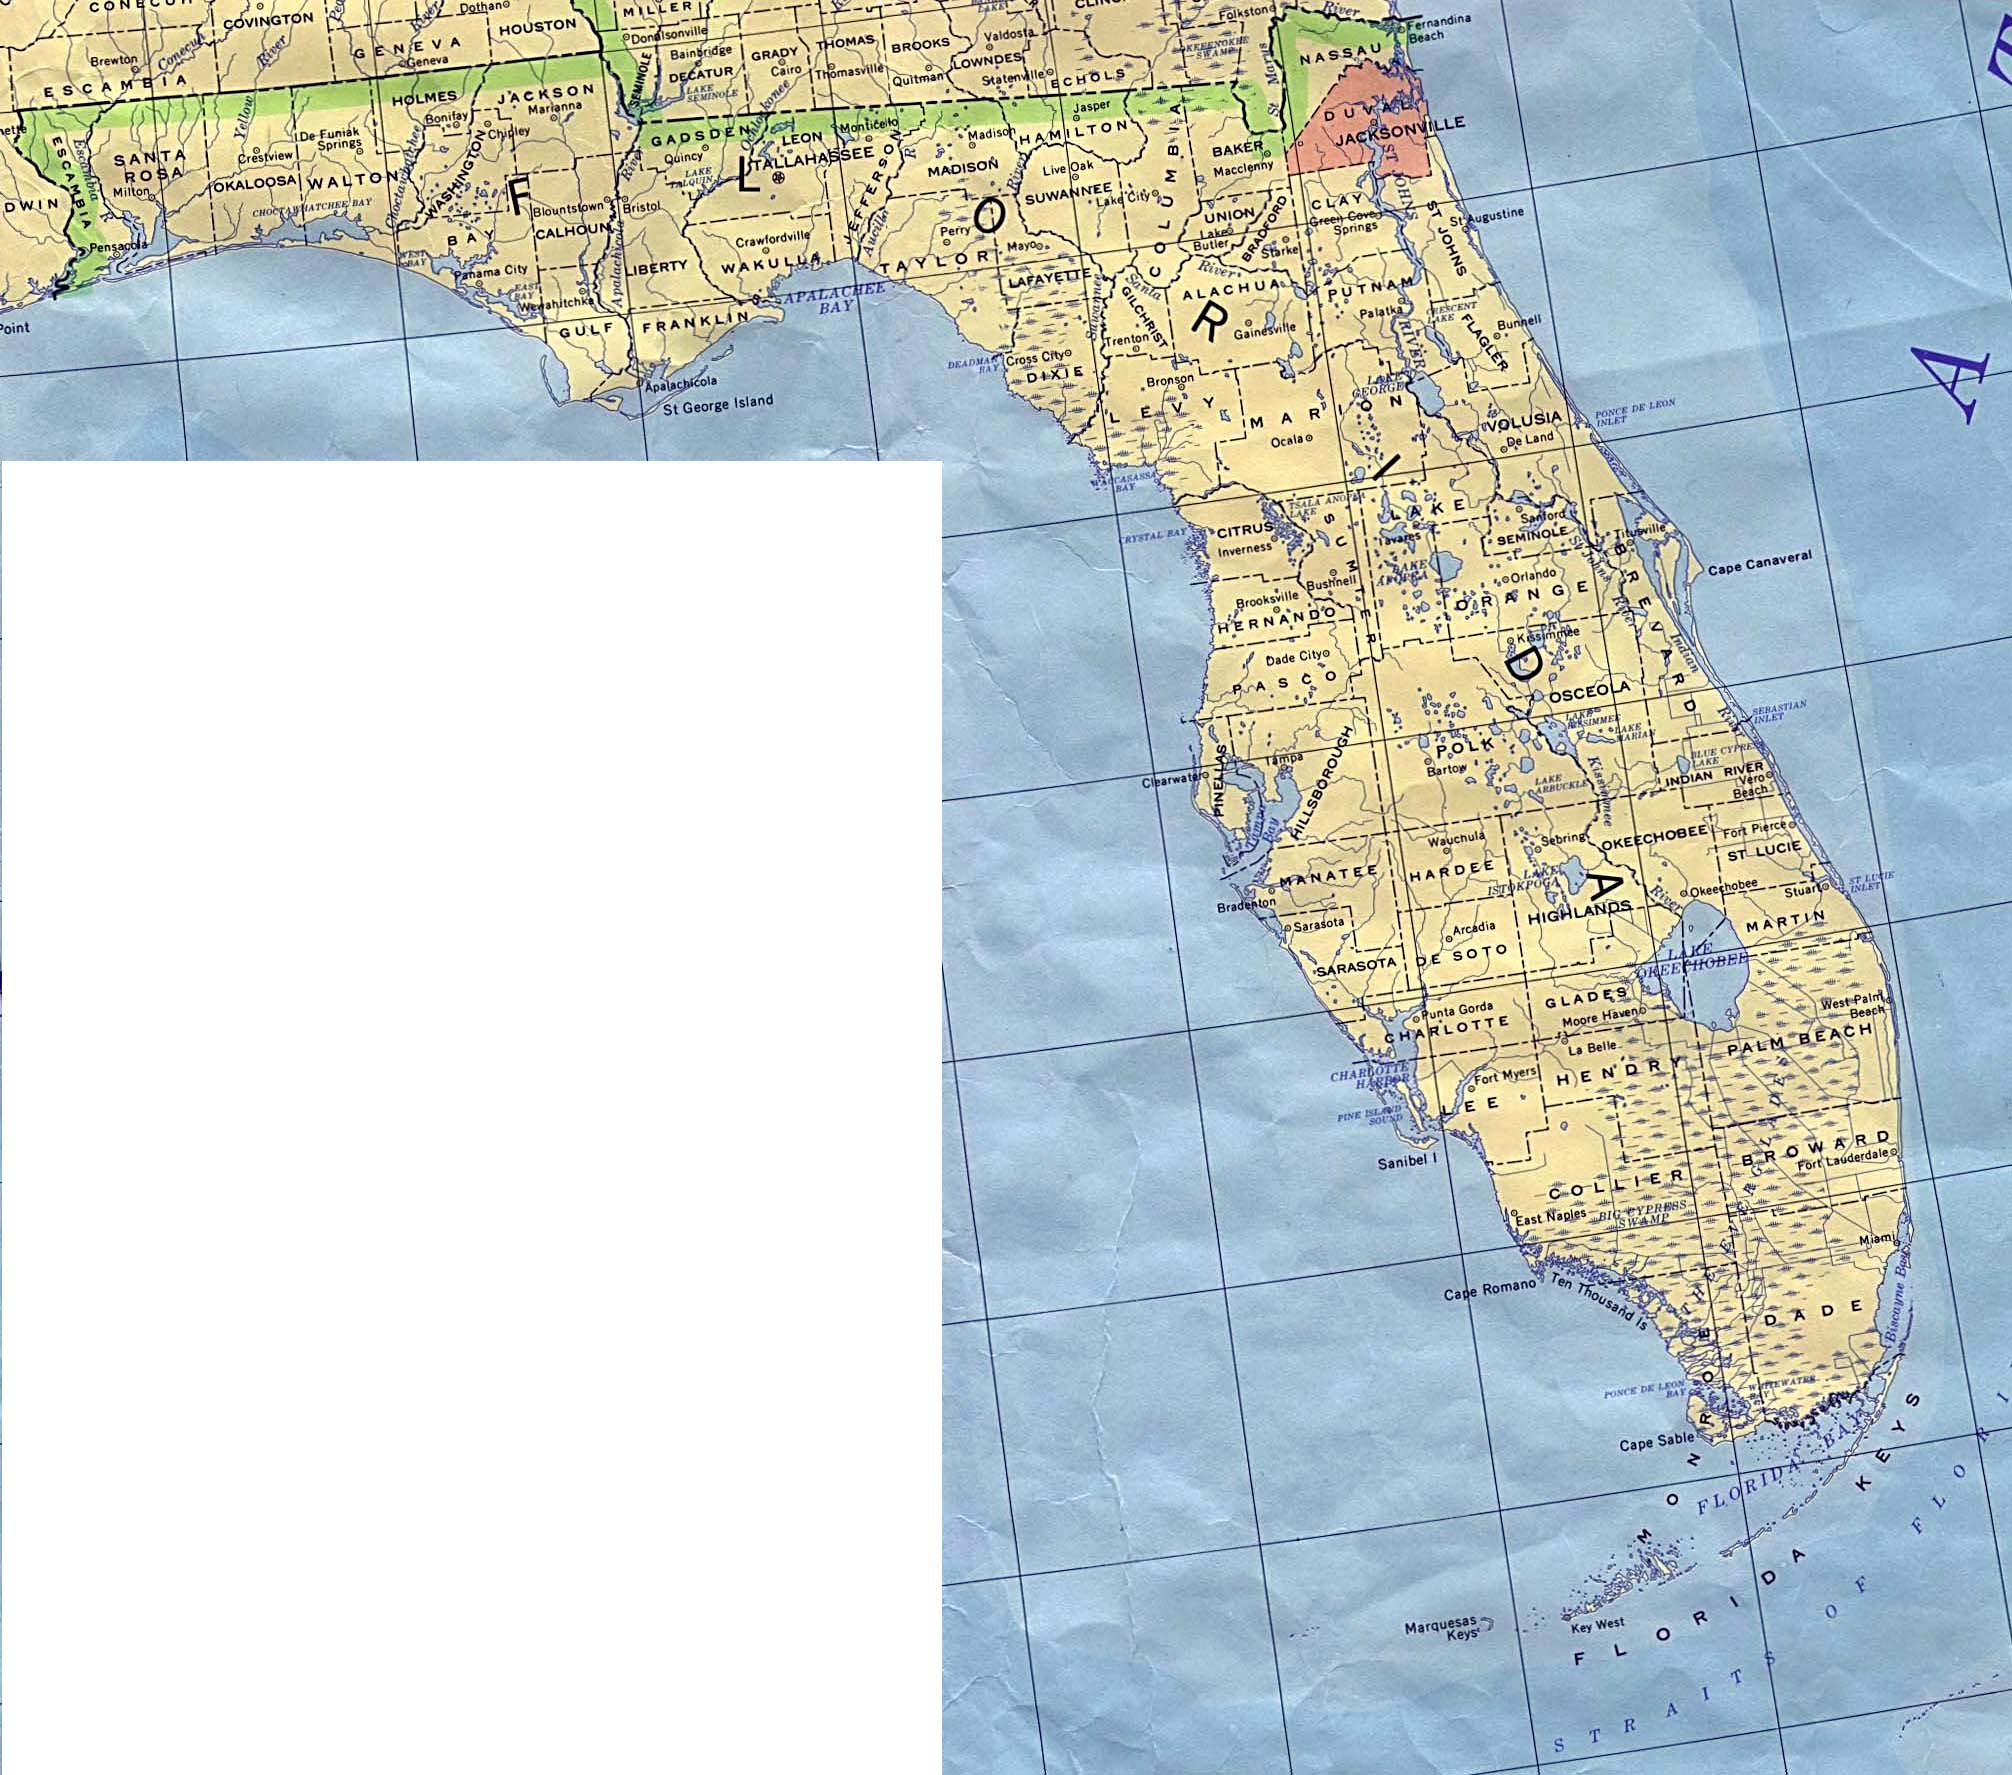 Reference map showing county boundaries and rivers of Florida state